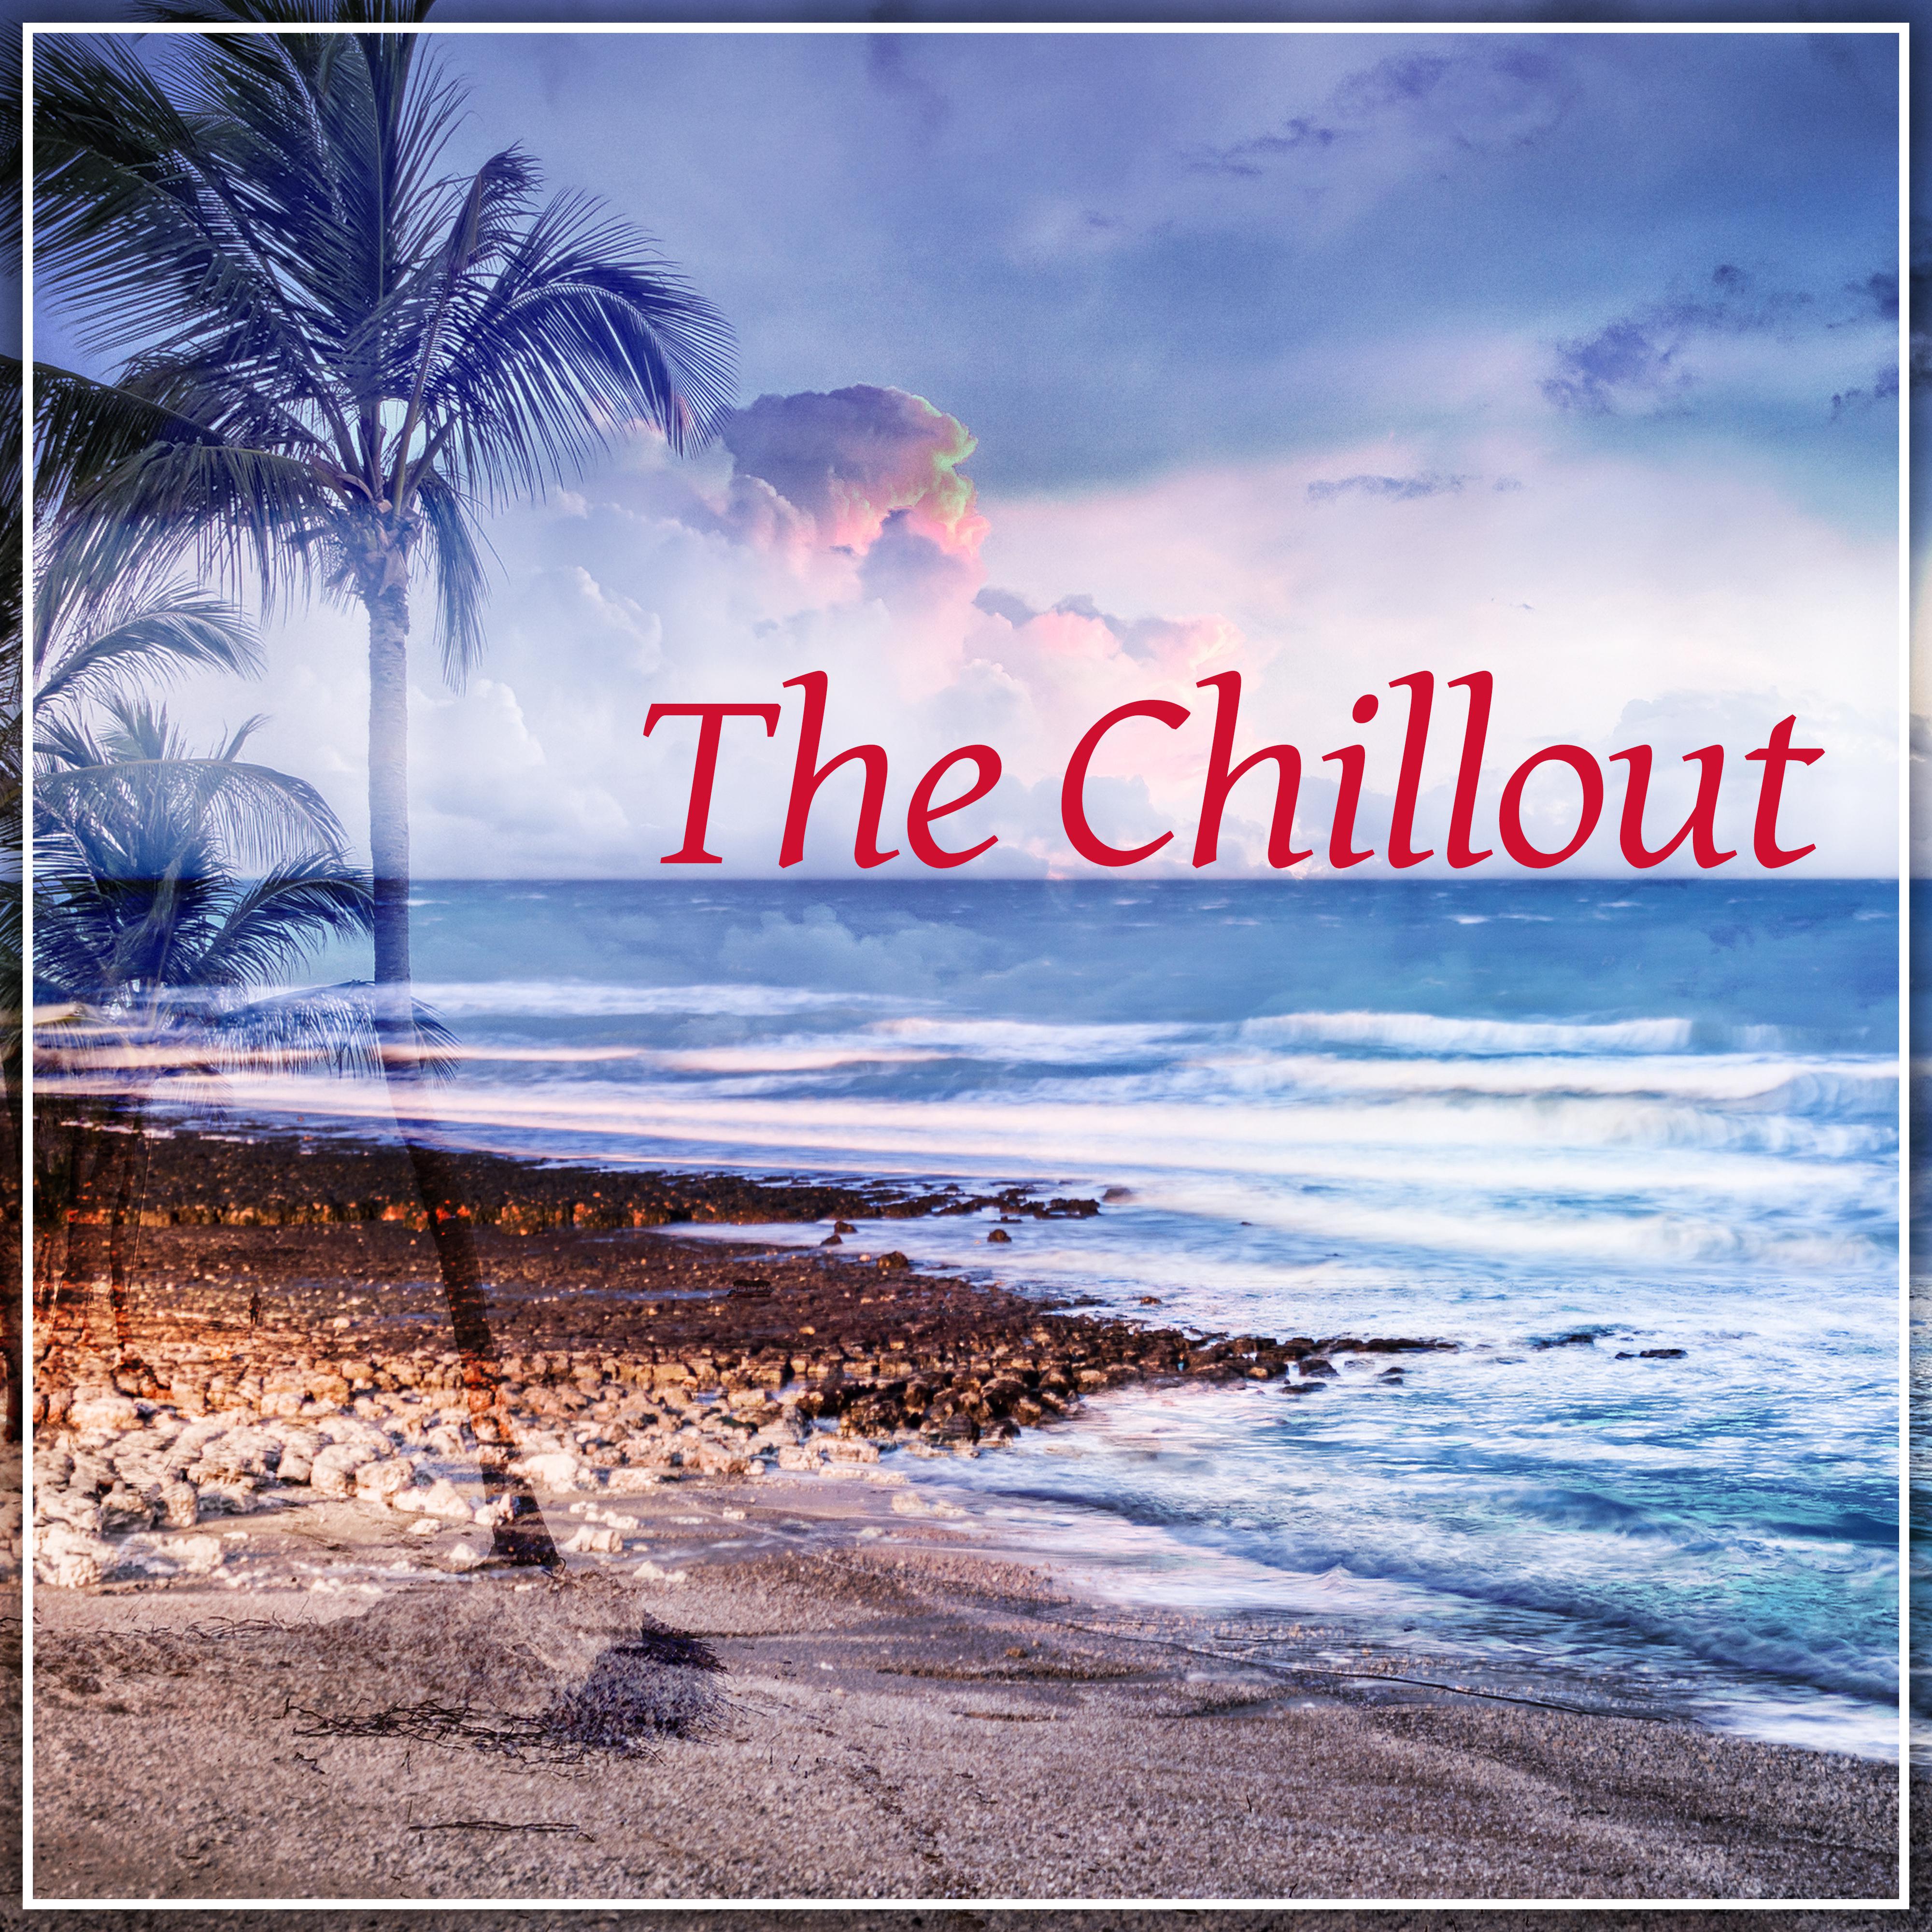 The Chillout - Beach Music, Bossa, Chillout Lounge, Relaxing Music, Ibiza Chill, Chill Out Music